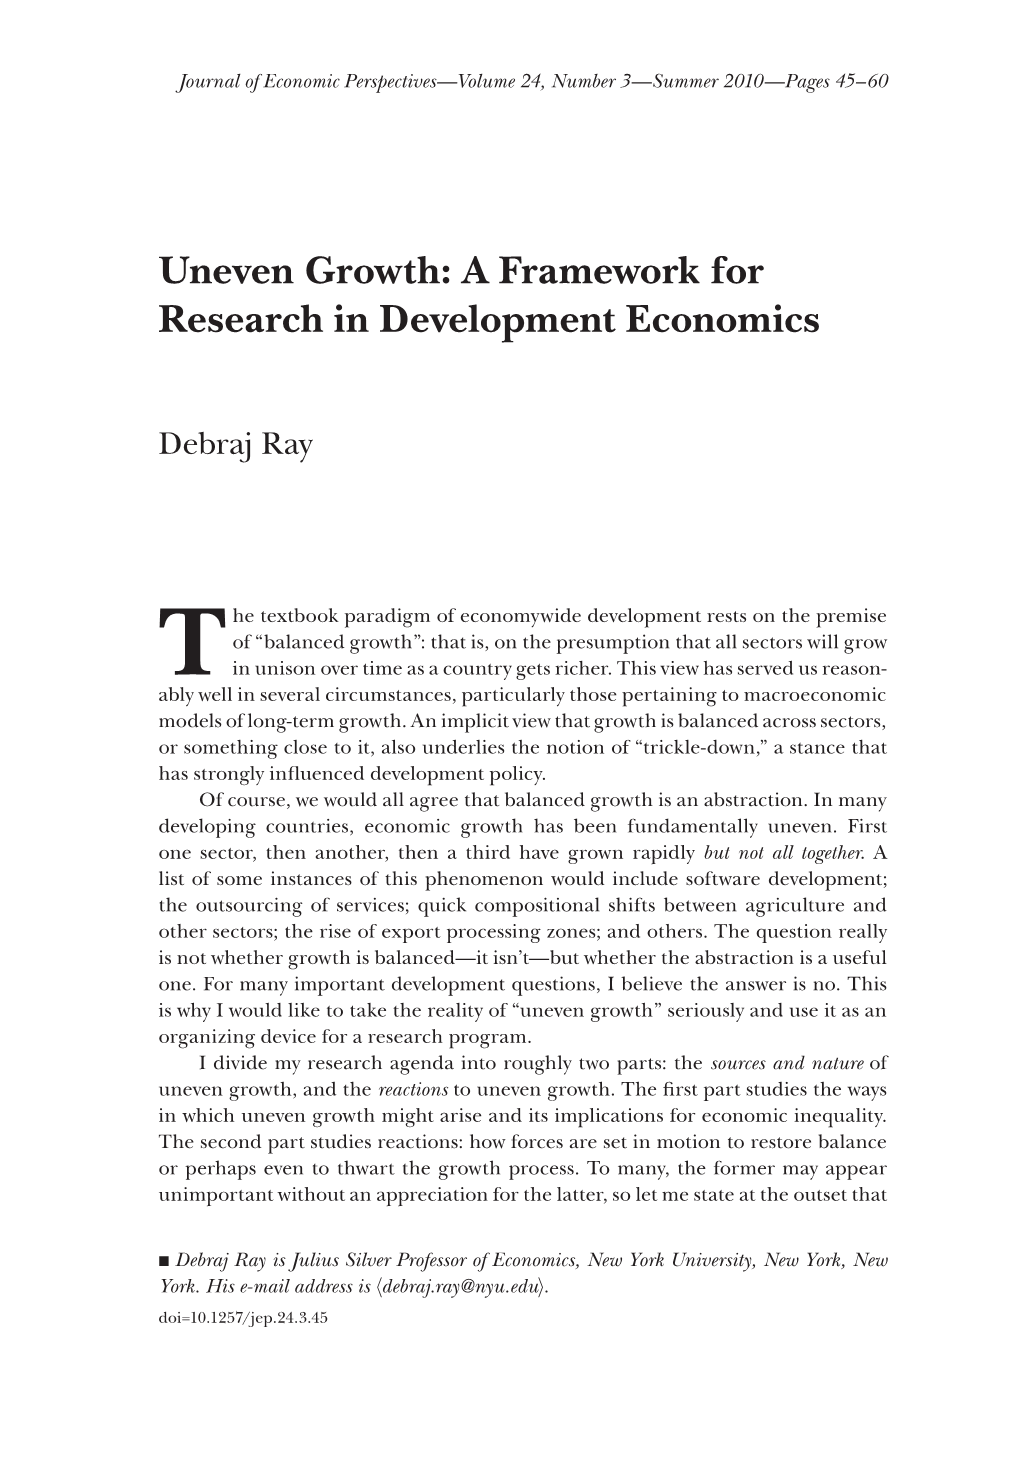 Uneven Growth: a Framework for Research in Development Economics